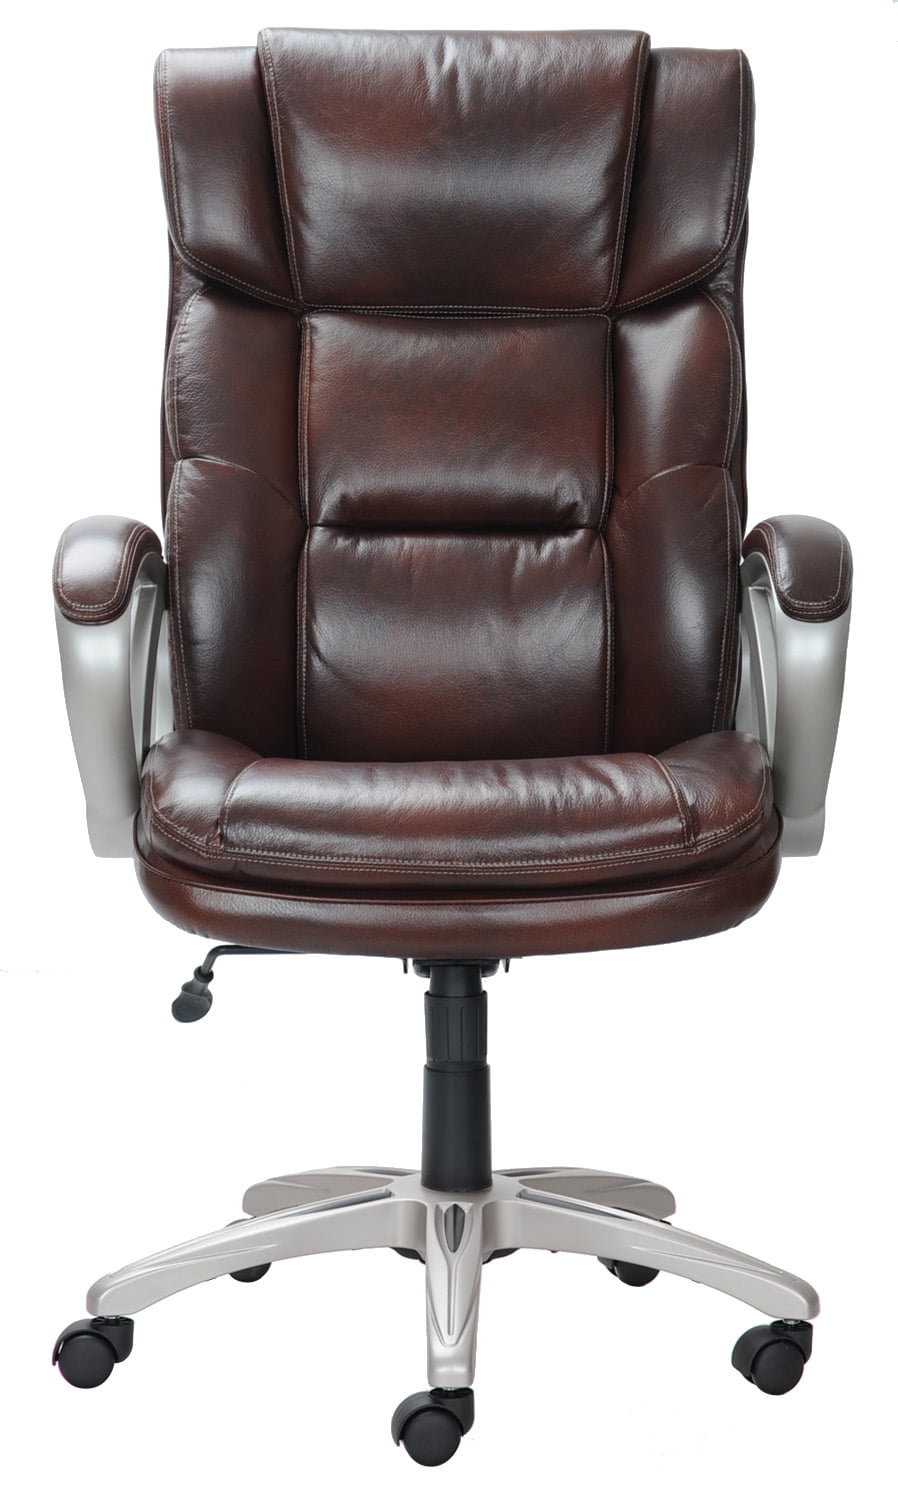 Broyhill Bonded Leather Executive Desk Adjustable Office Chair | eBay